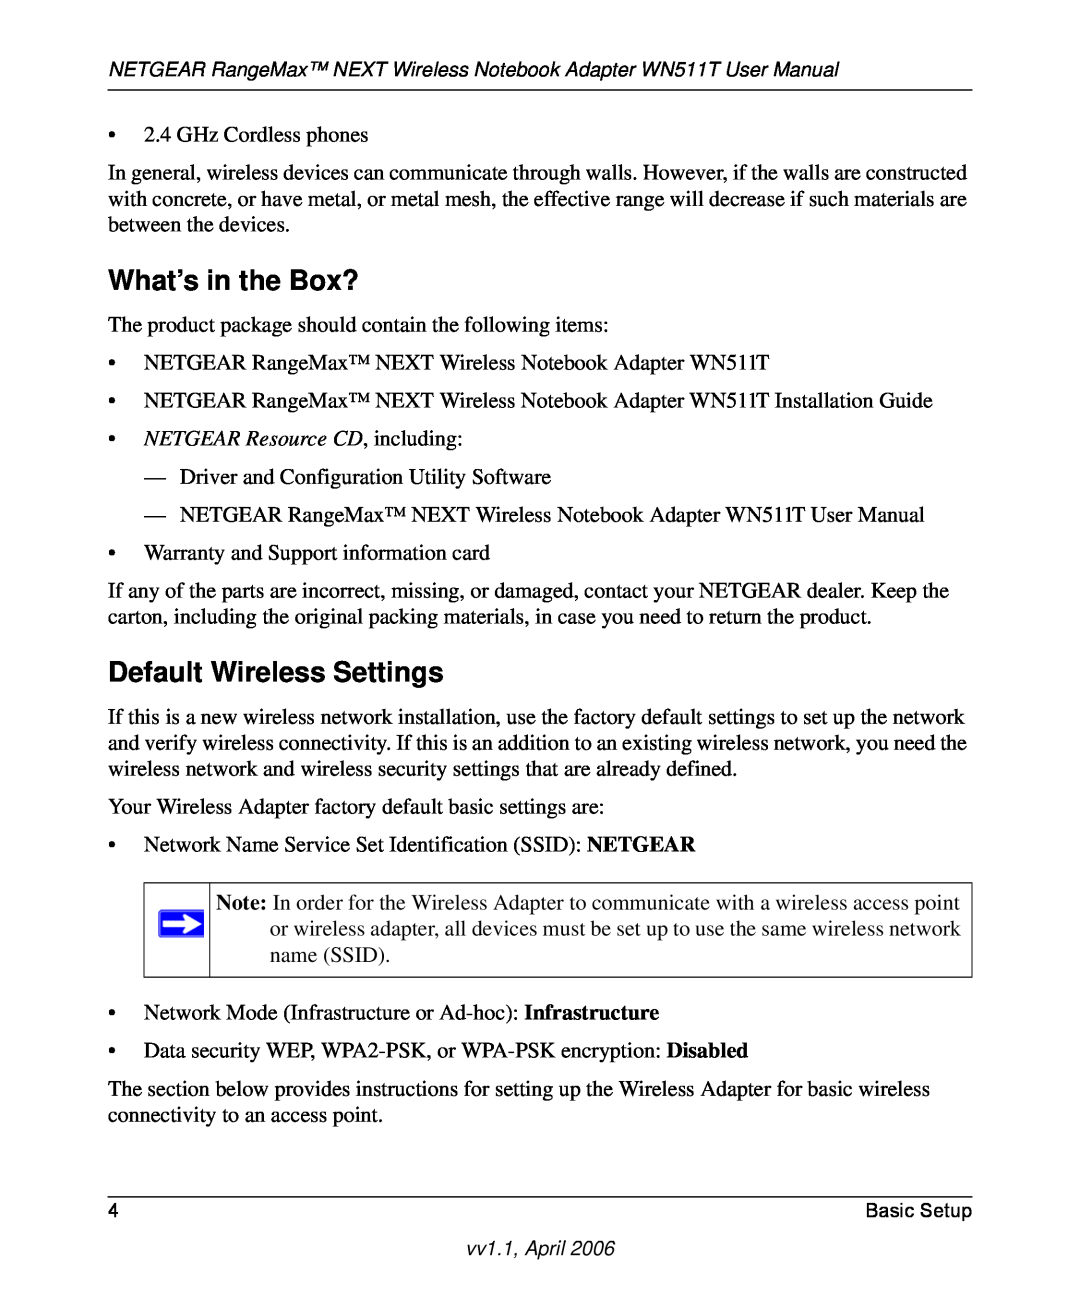 NETGEAR WN511T user manual What’s in the Box?, Default Wireless Settings, NETGEAR Resource CD, including 